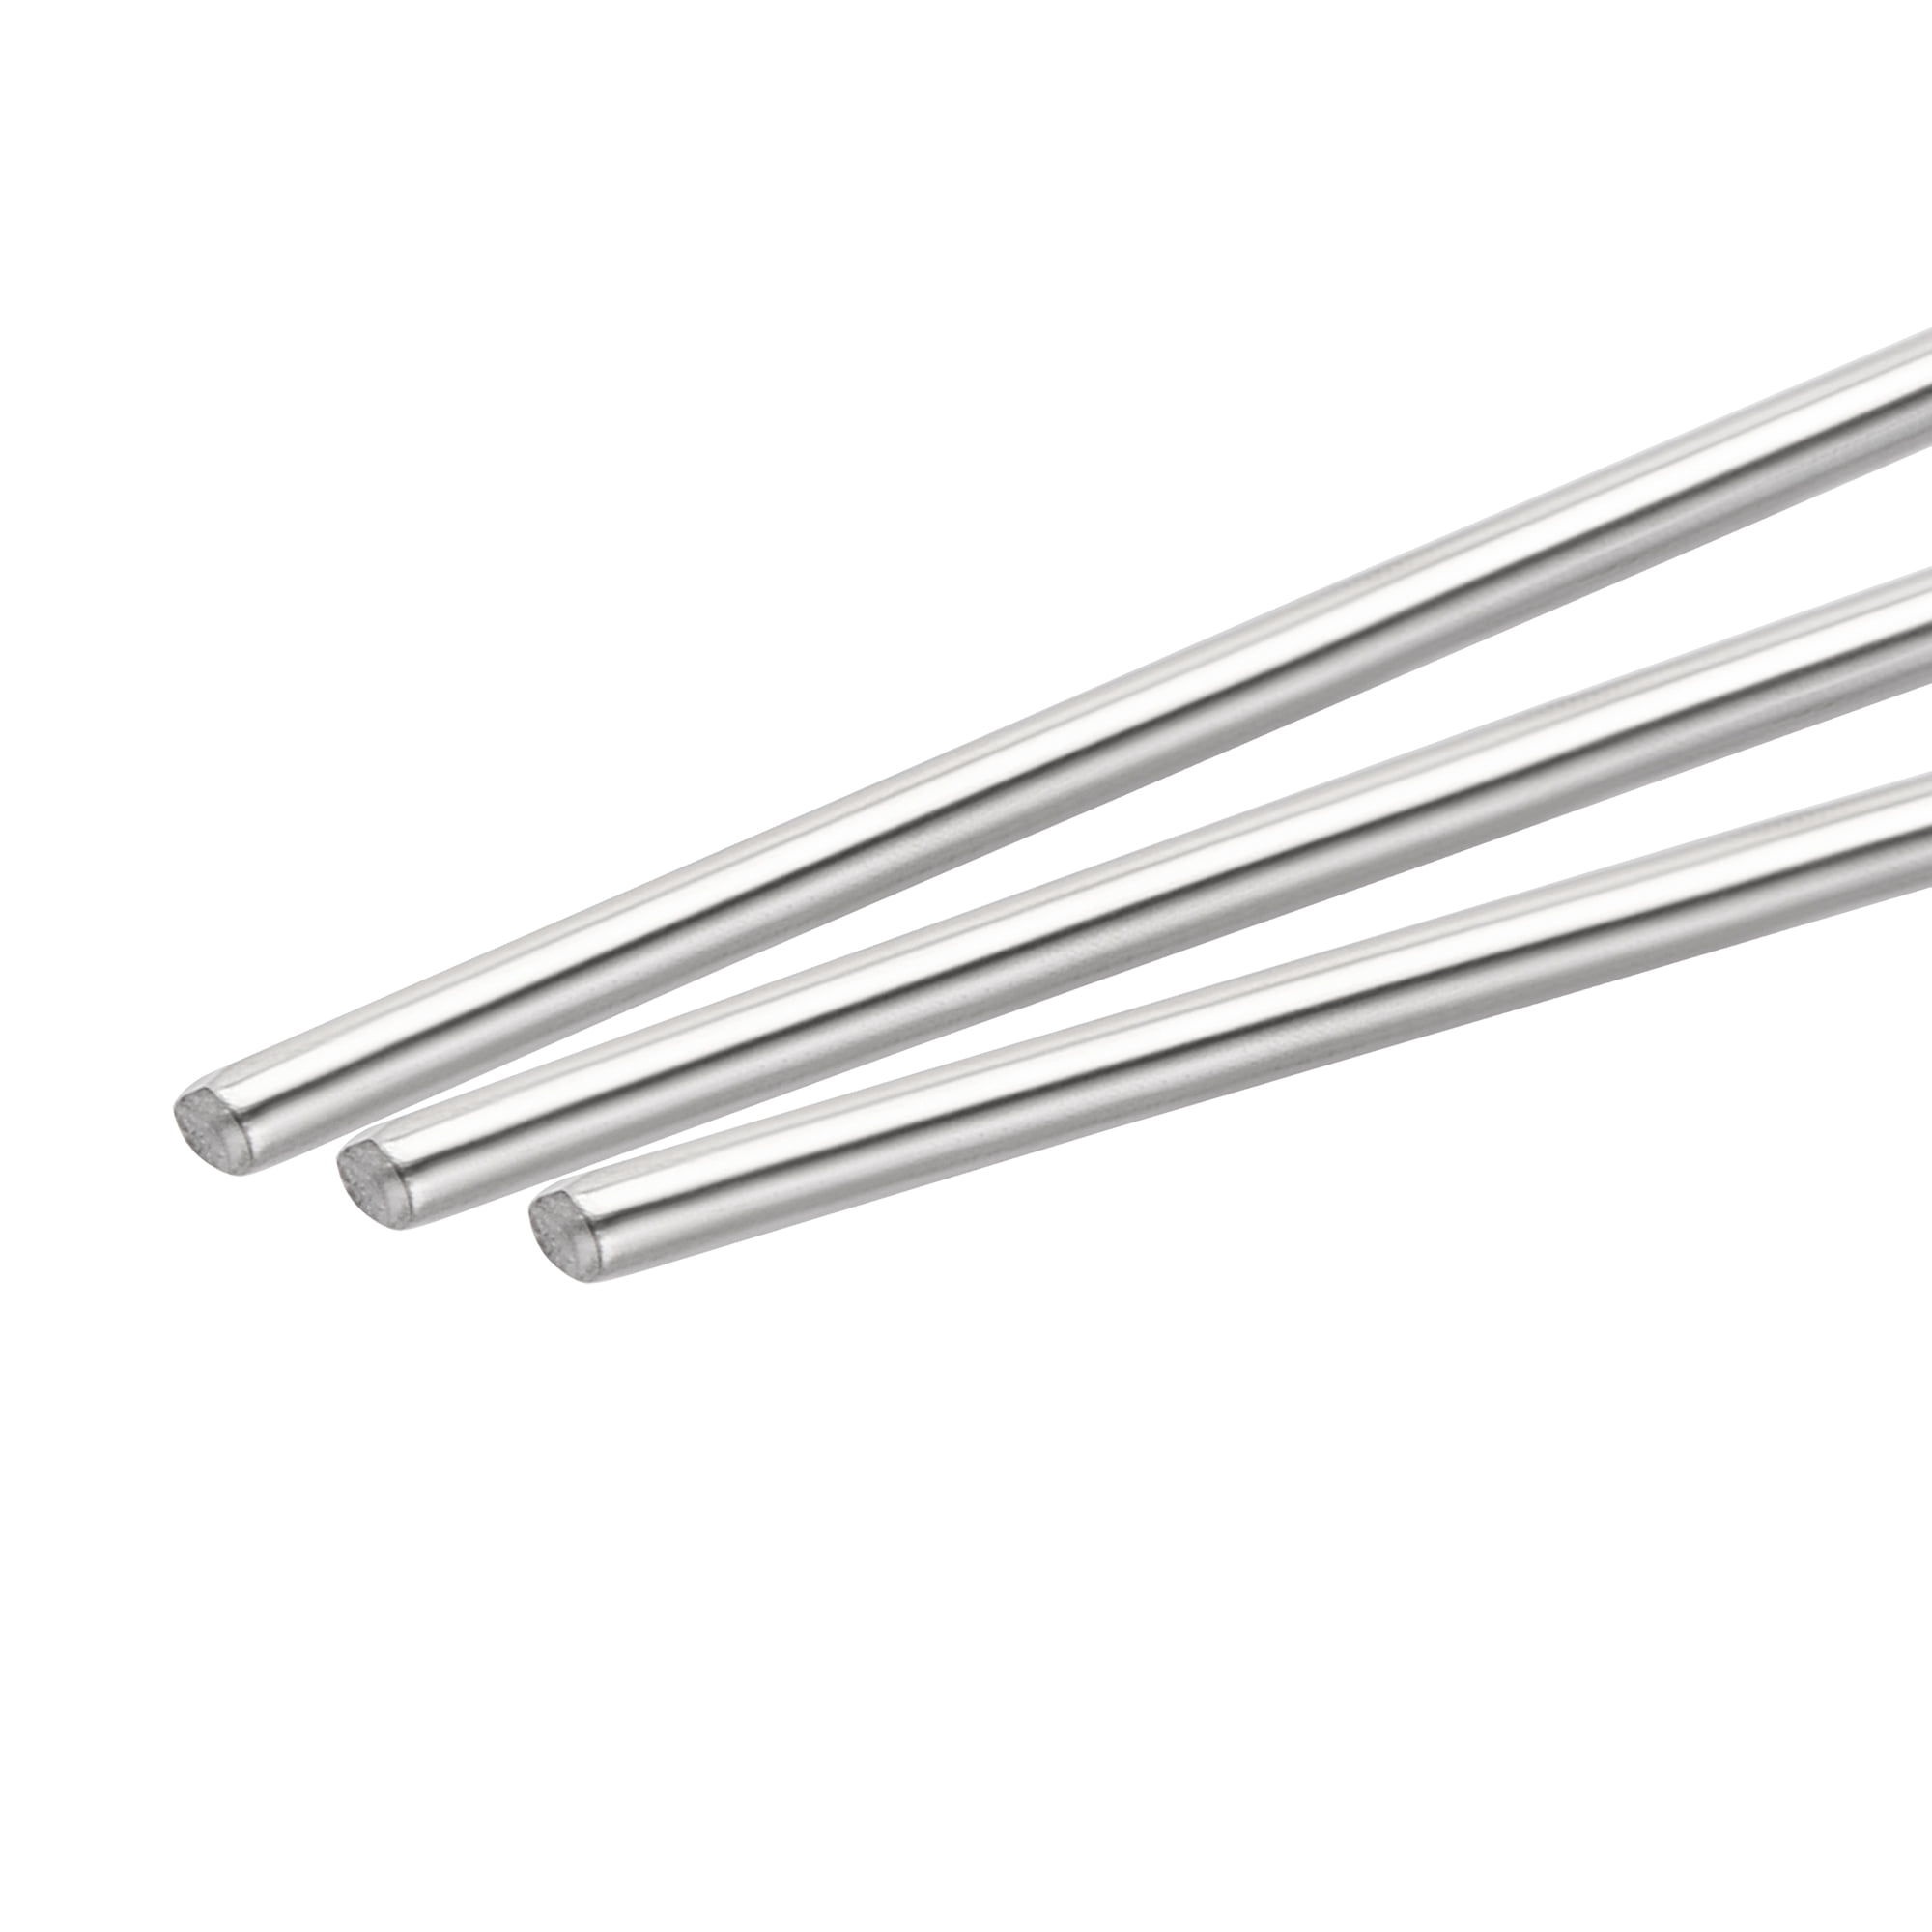 Uxcell 304 Stainless Steel Round Rods, 2mm x 250mm for DIY Craft Model Car  20 pack 